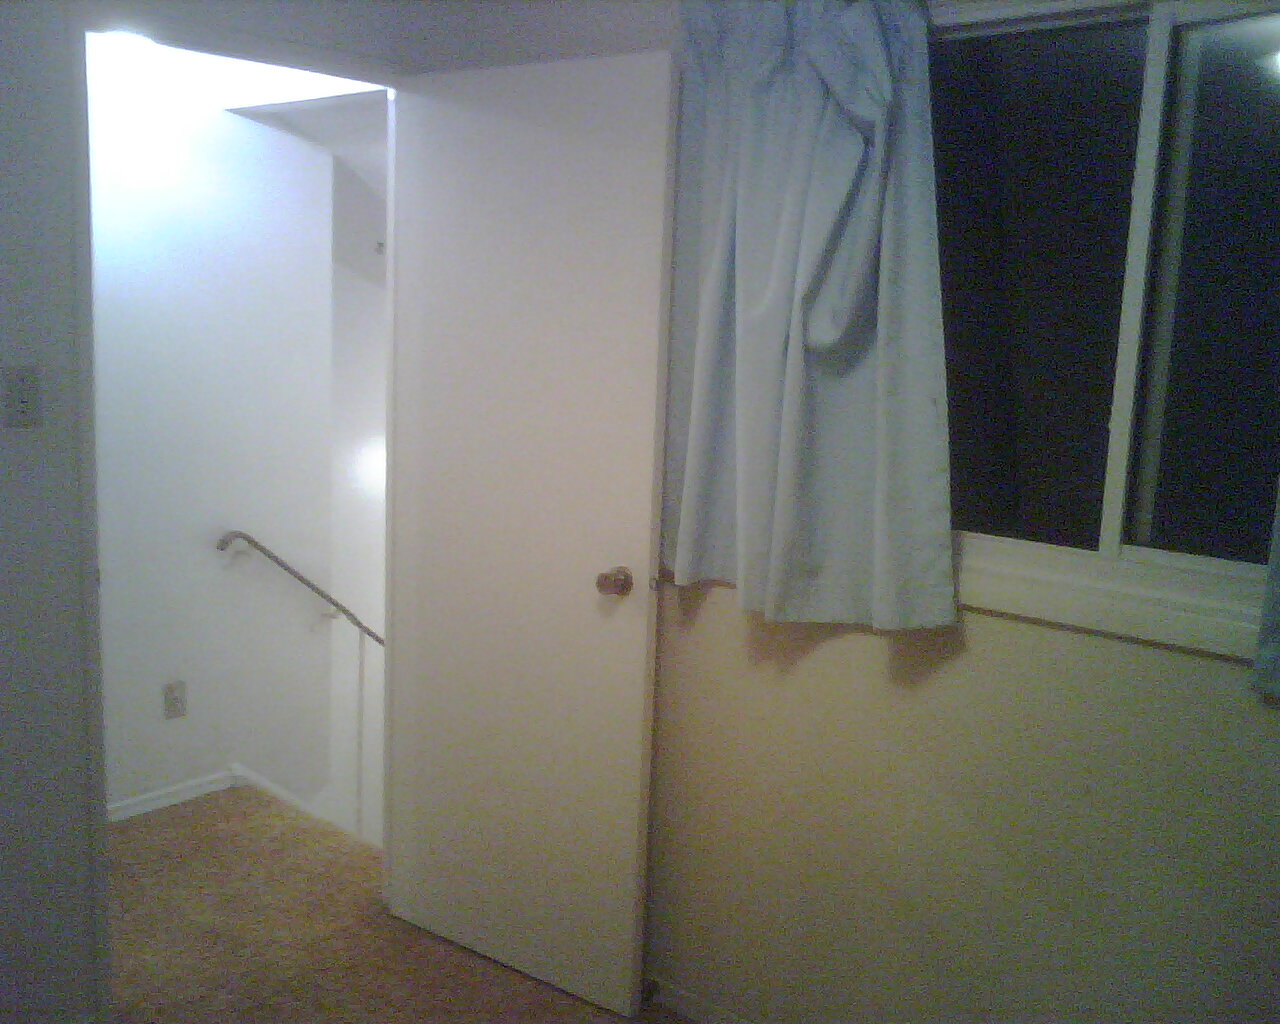 Upstairs (2nd Floor) bedroom 1's front end as seen from the room's corner